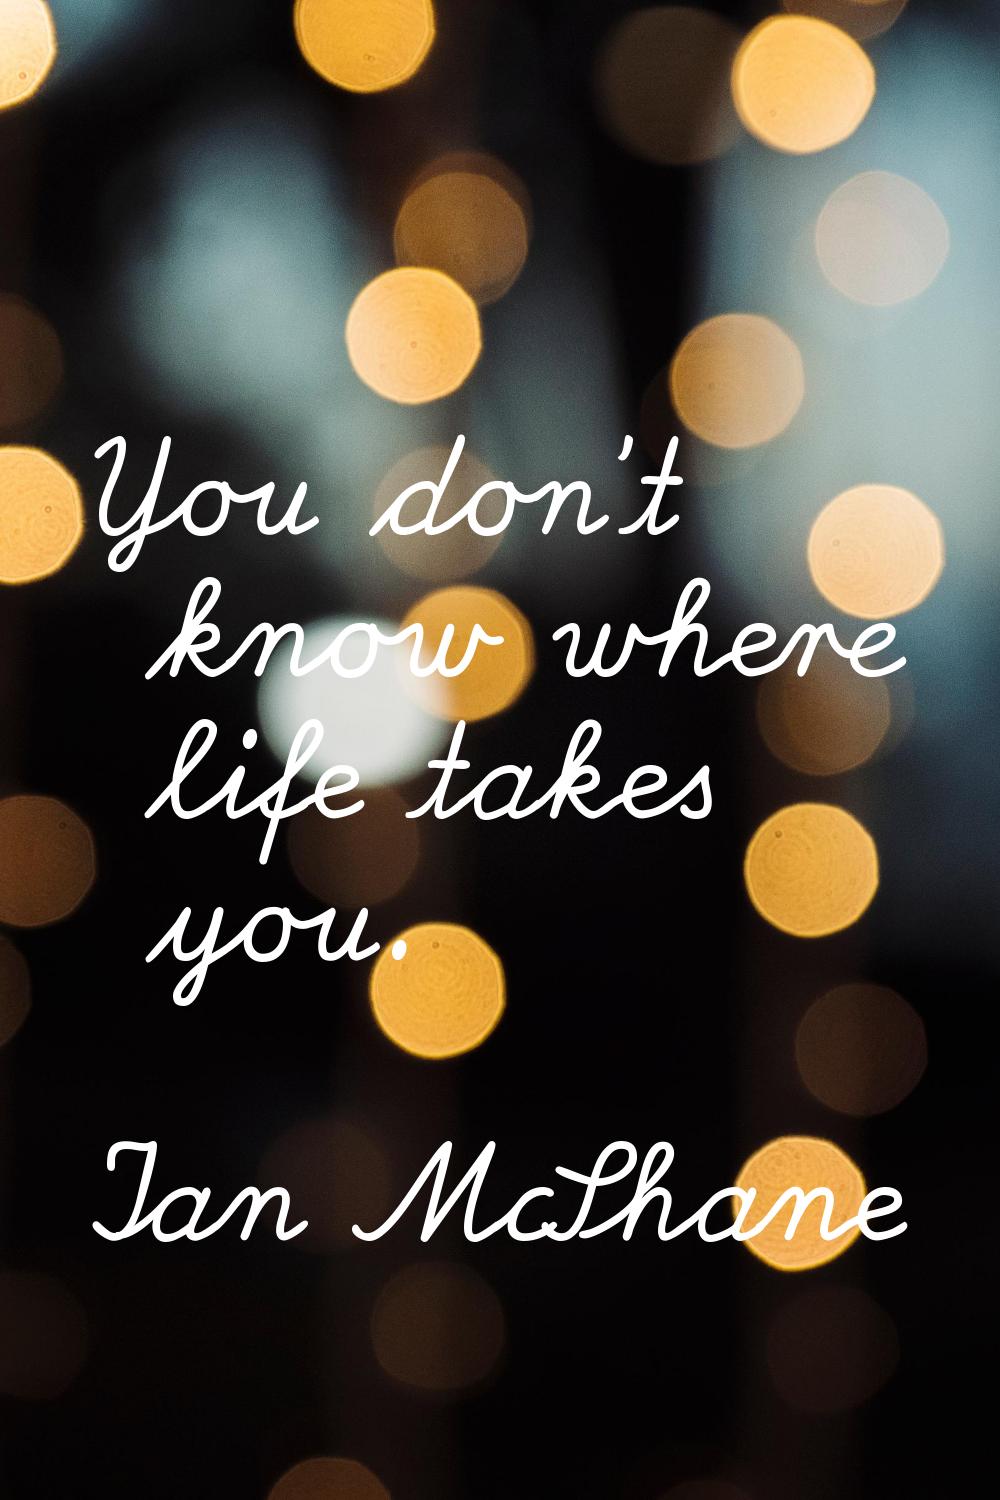 You don't know where life takes you.